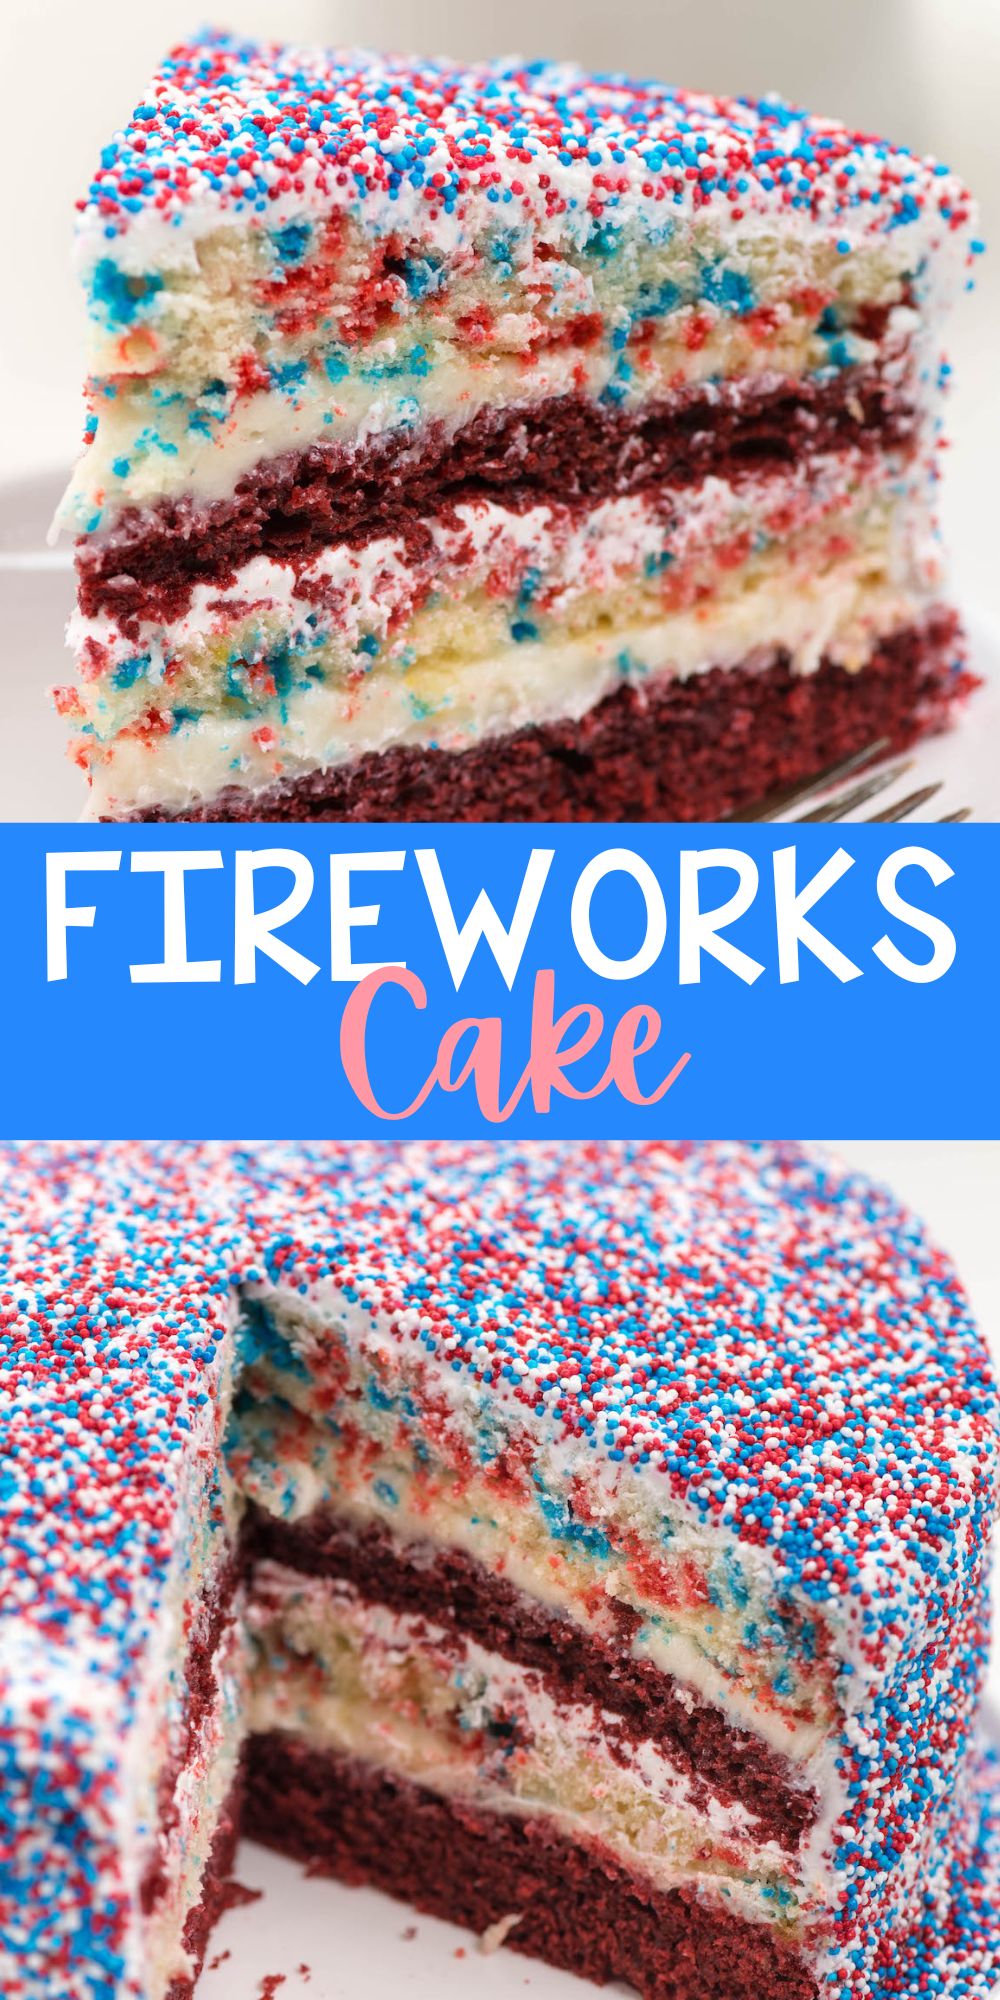 two photos of yellow and red layered cake covered in patriotic sprinkles on a white plate with words on the image.